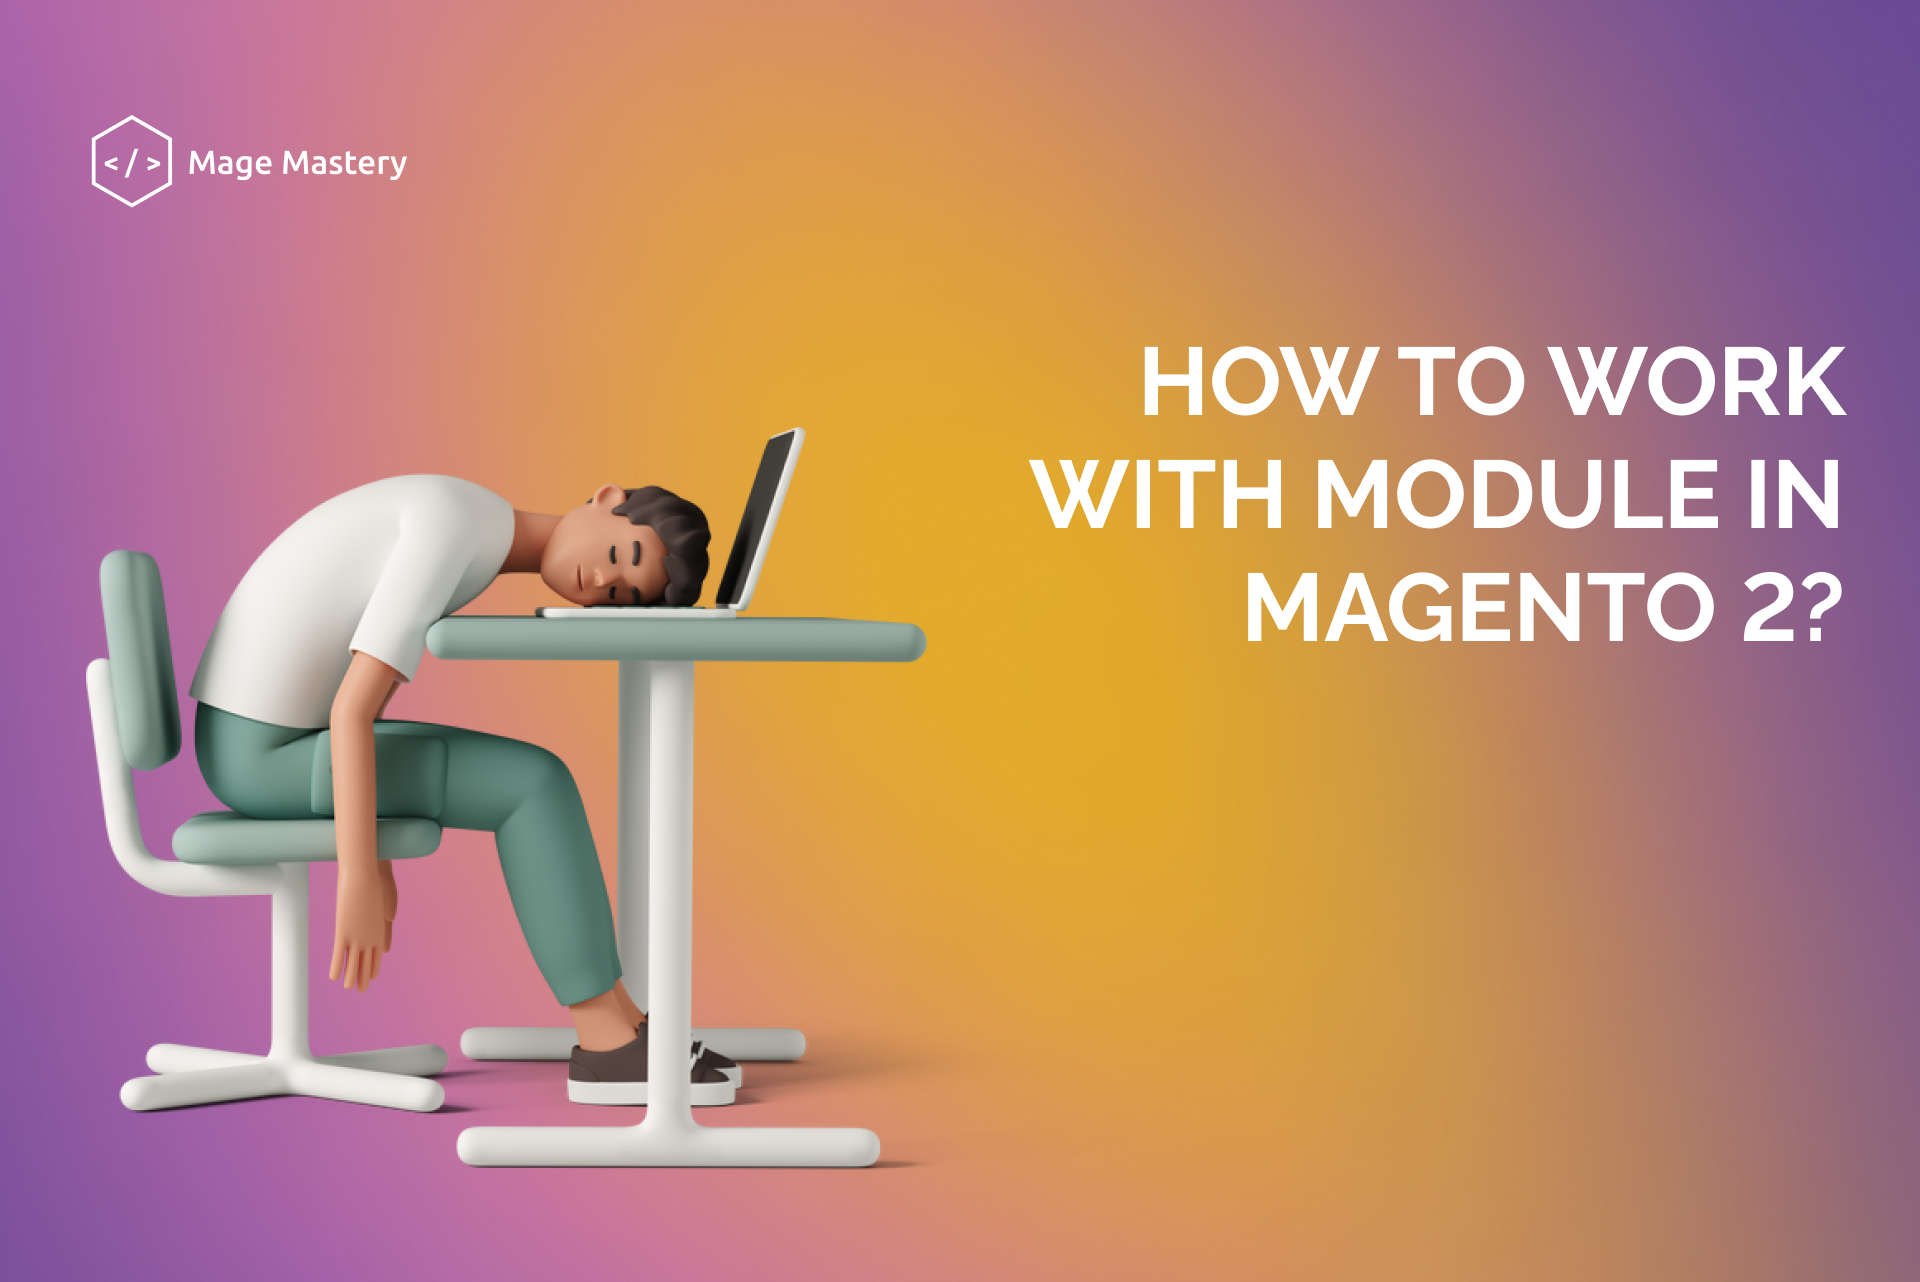 A Module in Magento 2